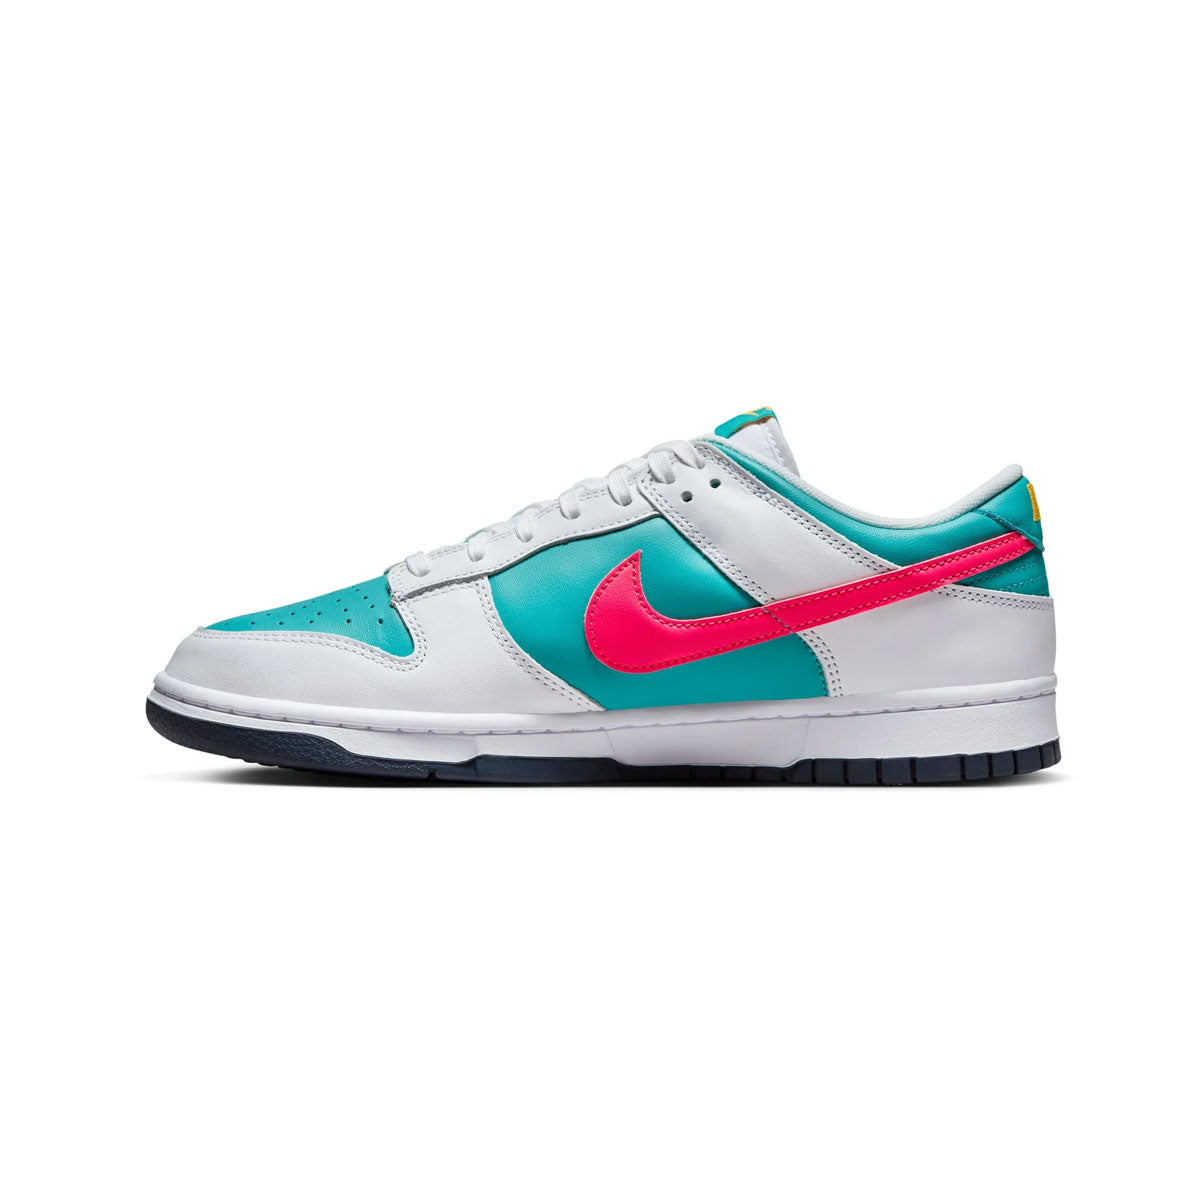 Nike Dunk Low “Dusty Cactus”